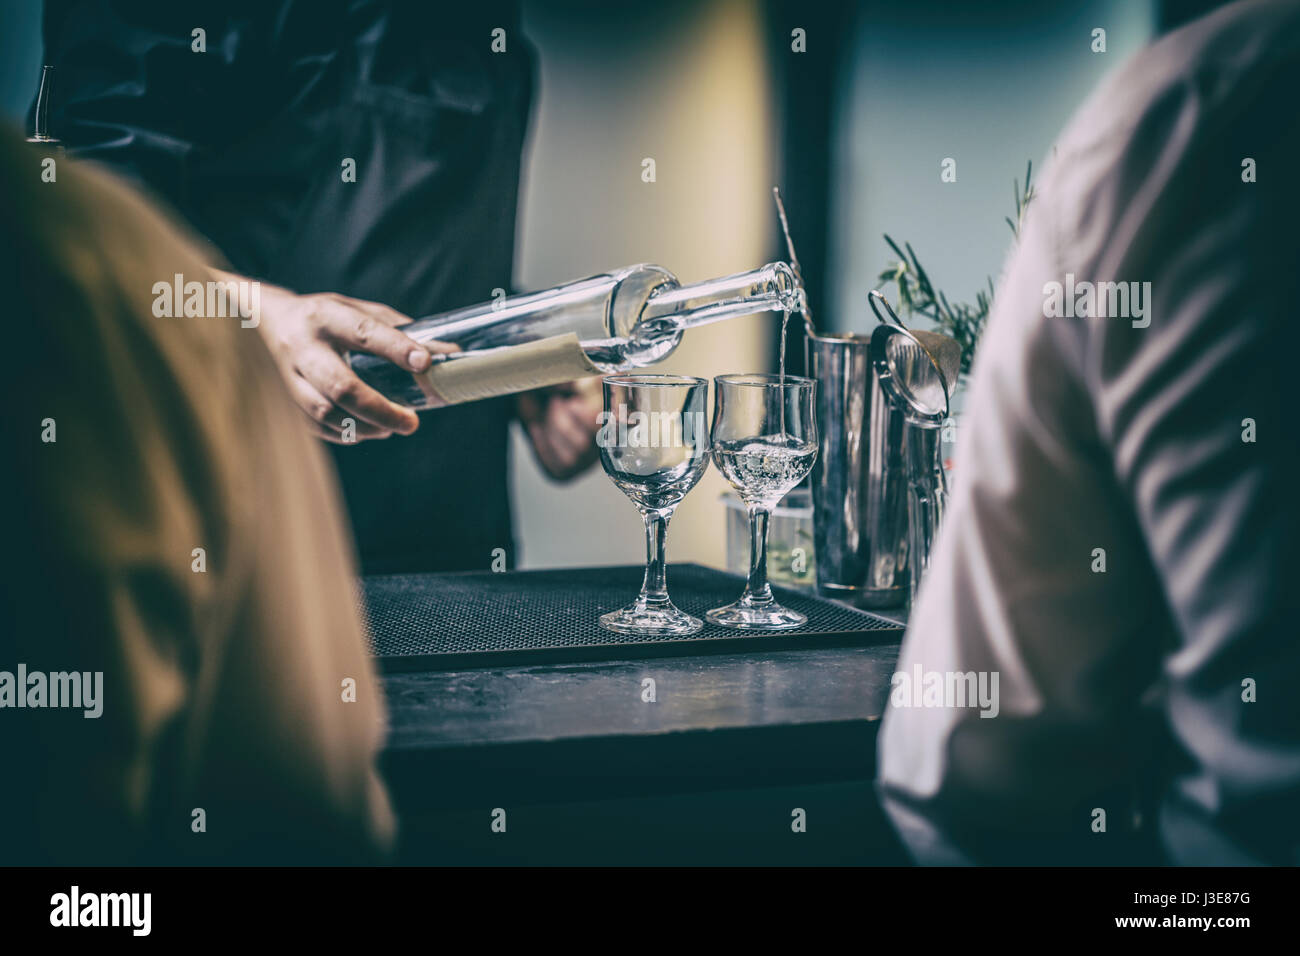 Bartender serving alcohol drinks behind bar counter. Stock Photo